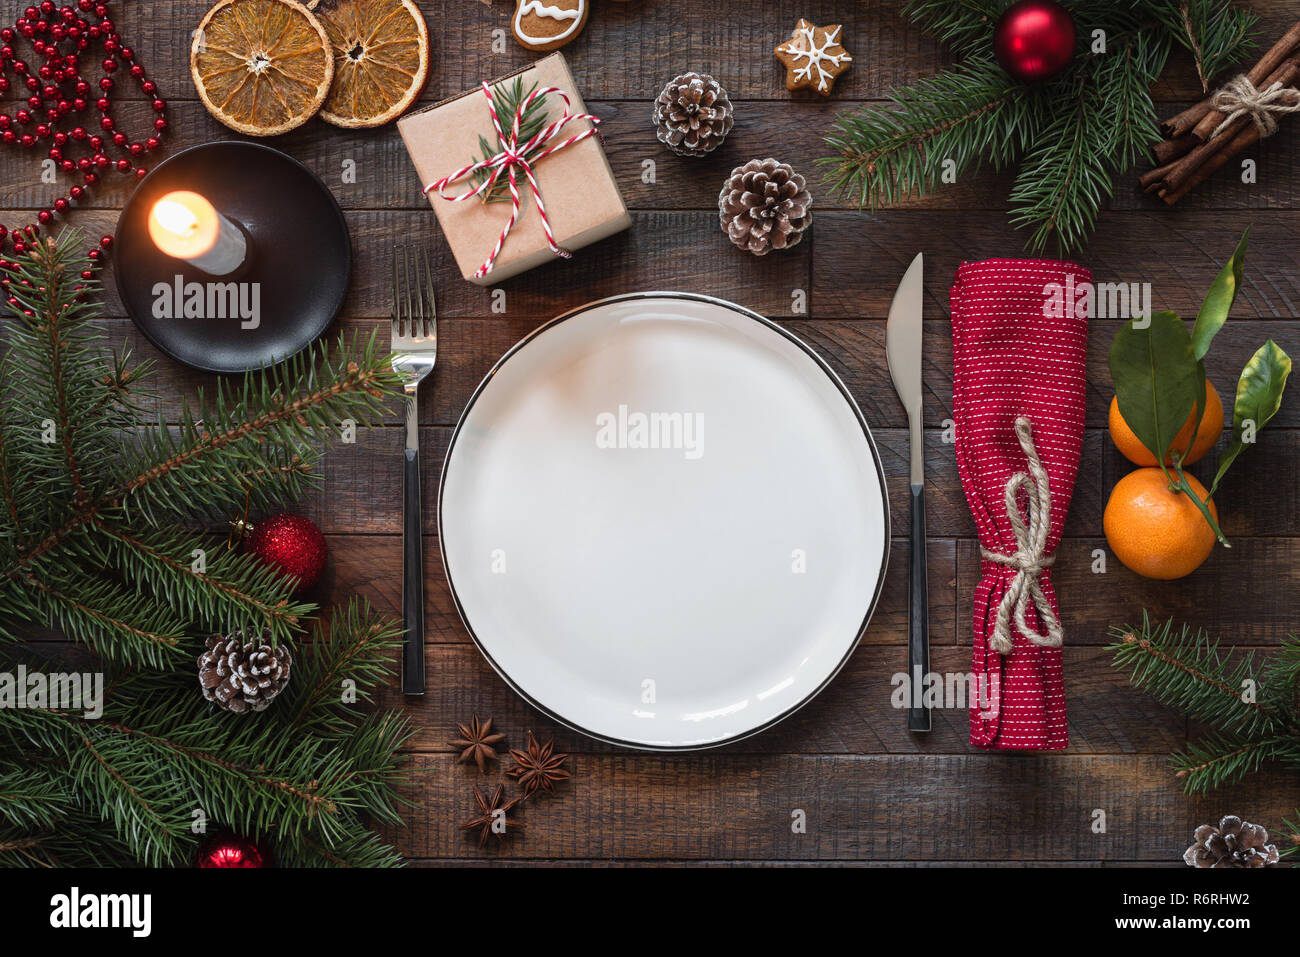 Authentic Christmas Table Setting. Empty Plate, Candles, Silverware, Fir tree, Gift boxes. Top view with copy space for text Stock Photo